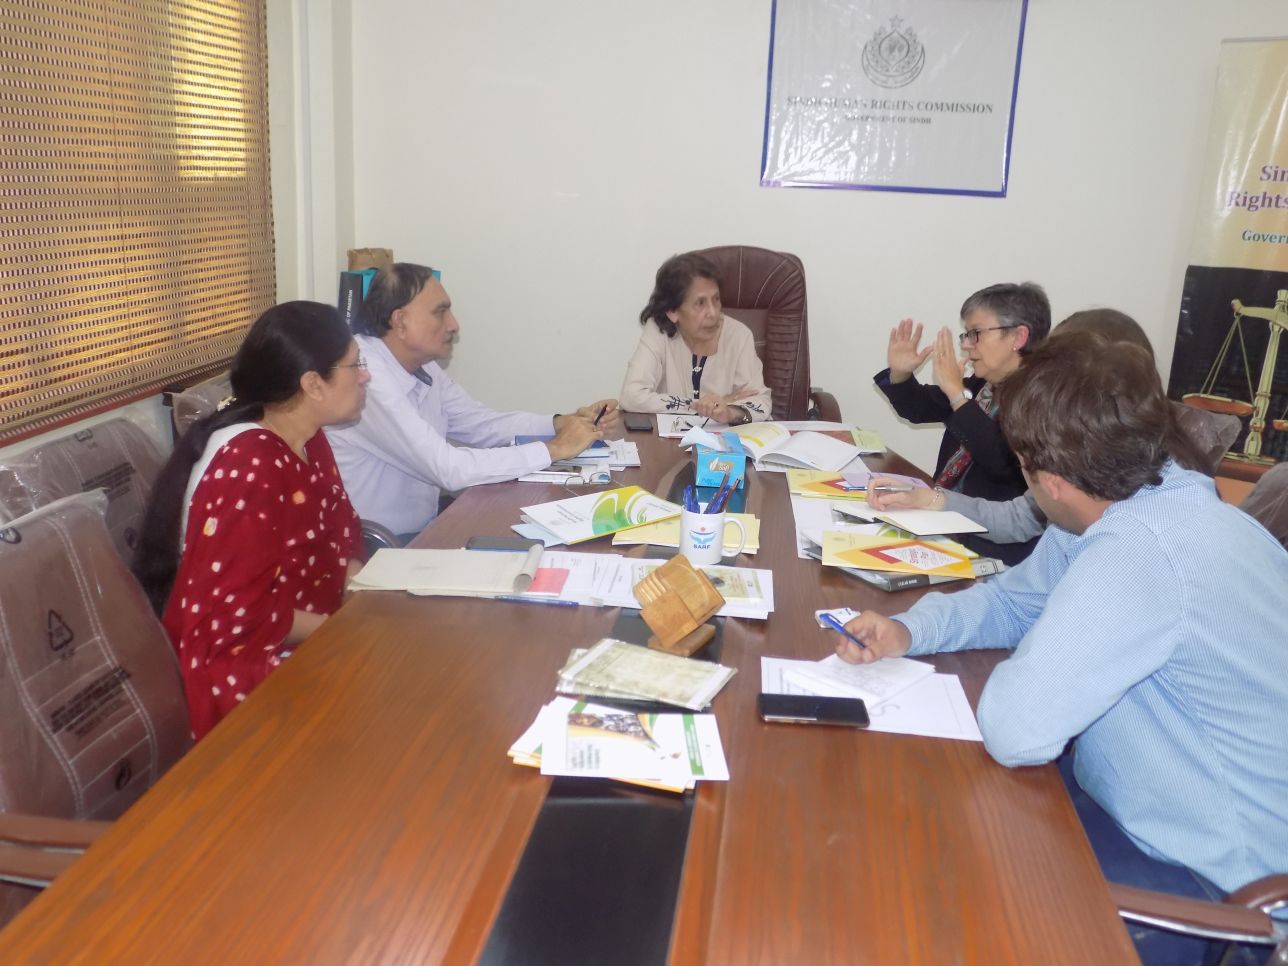 Meeting with Australian High Commissioner